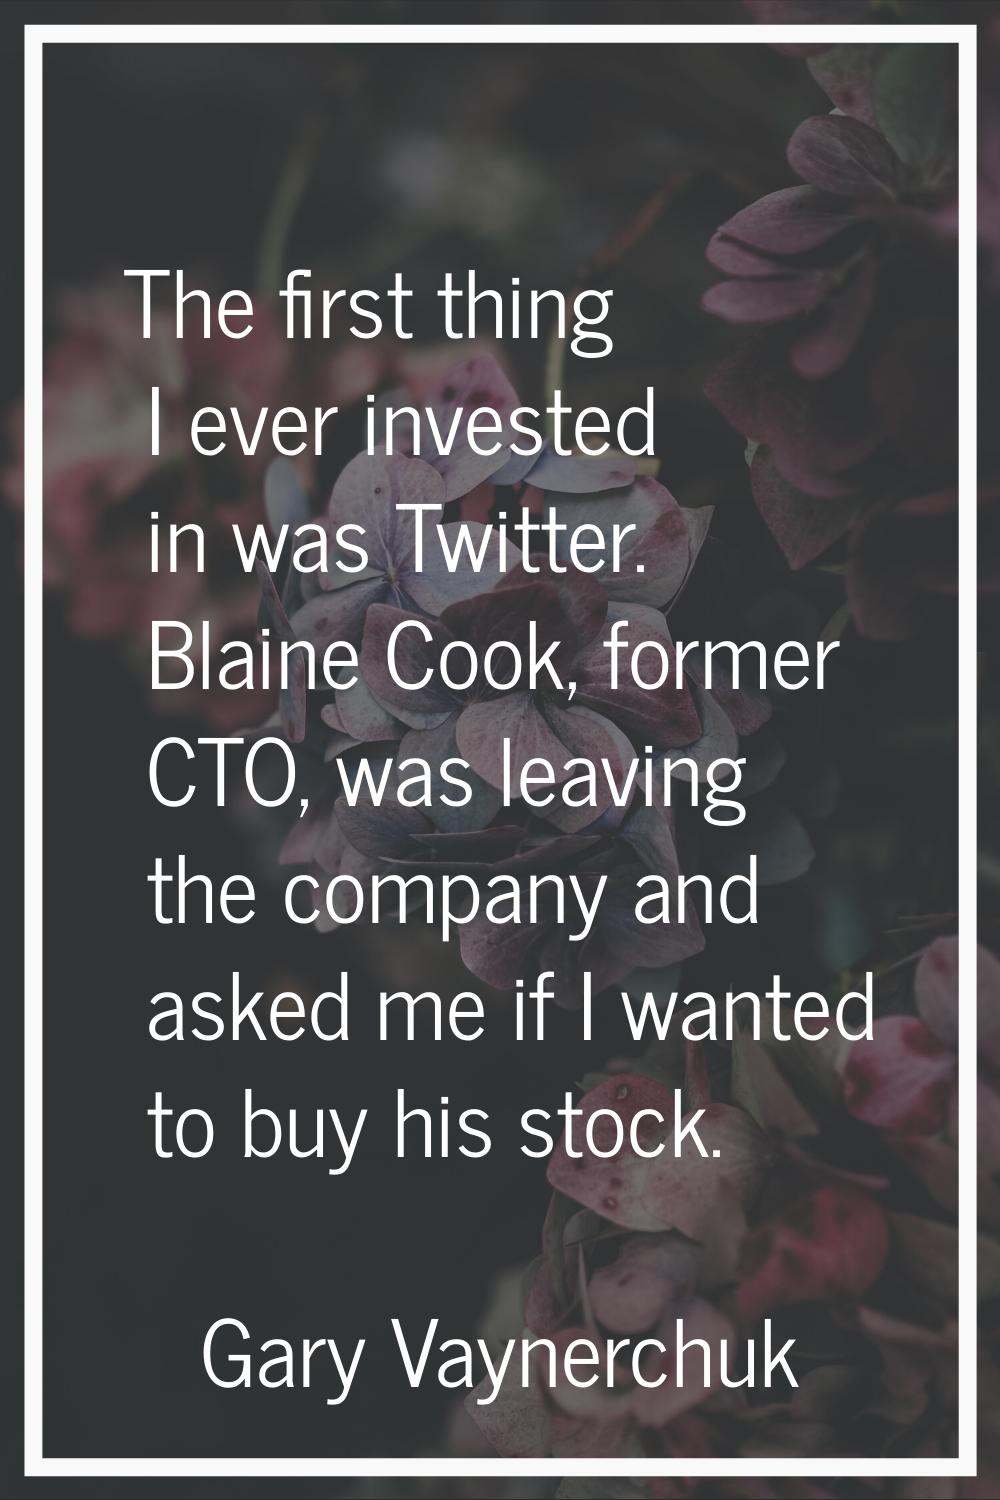 The first thing I ever invested in was Twitter. Blaine Cook, former CTO, was leaving the company an